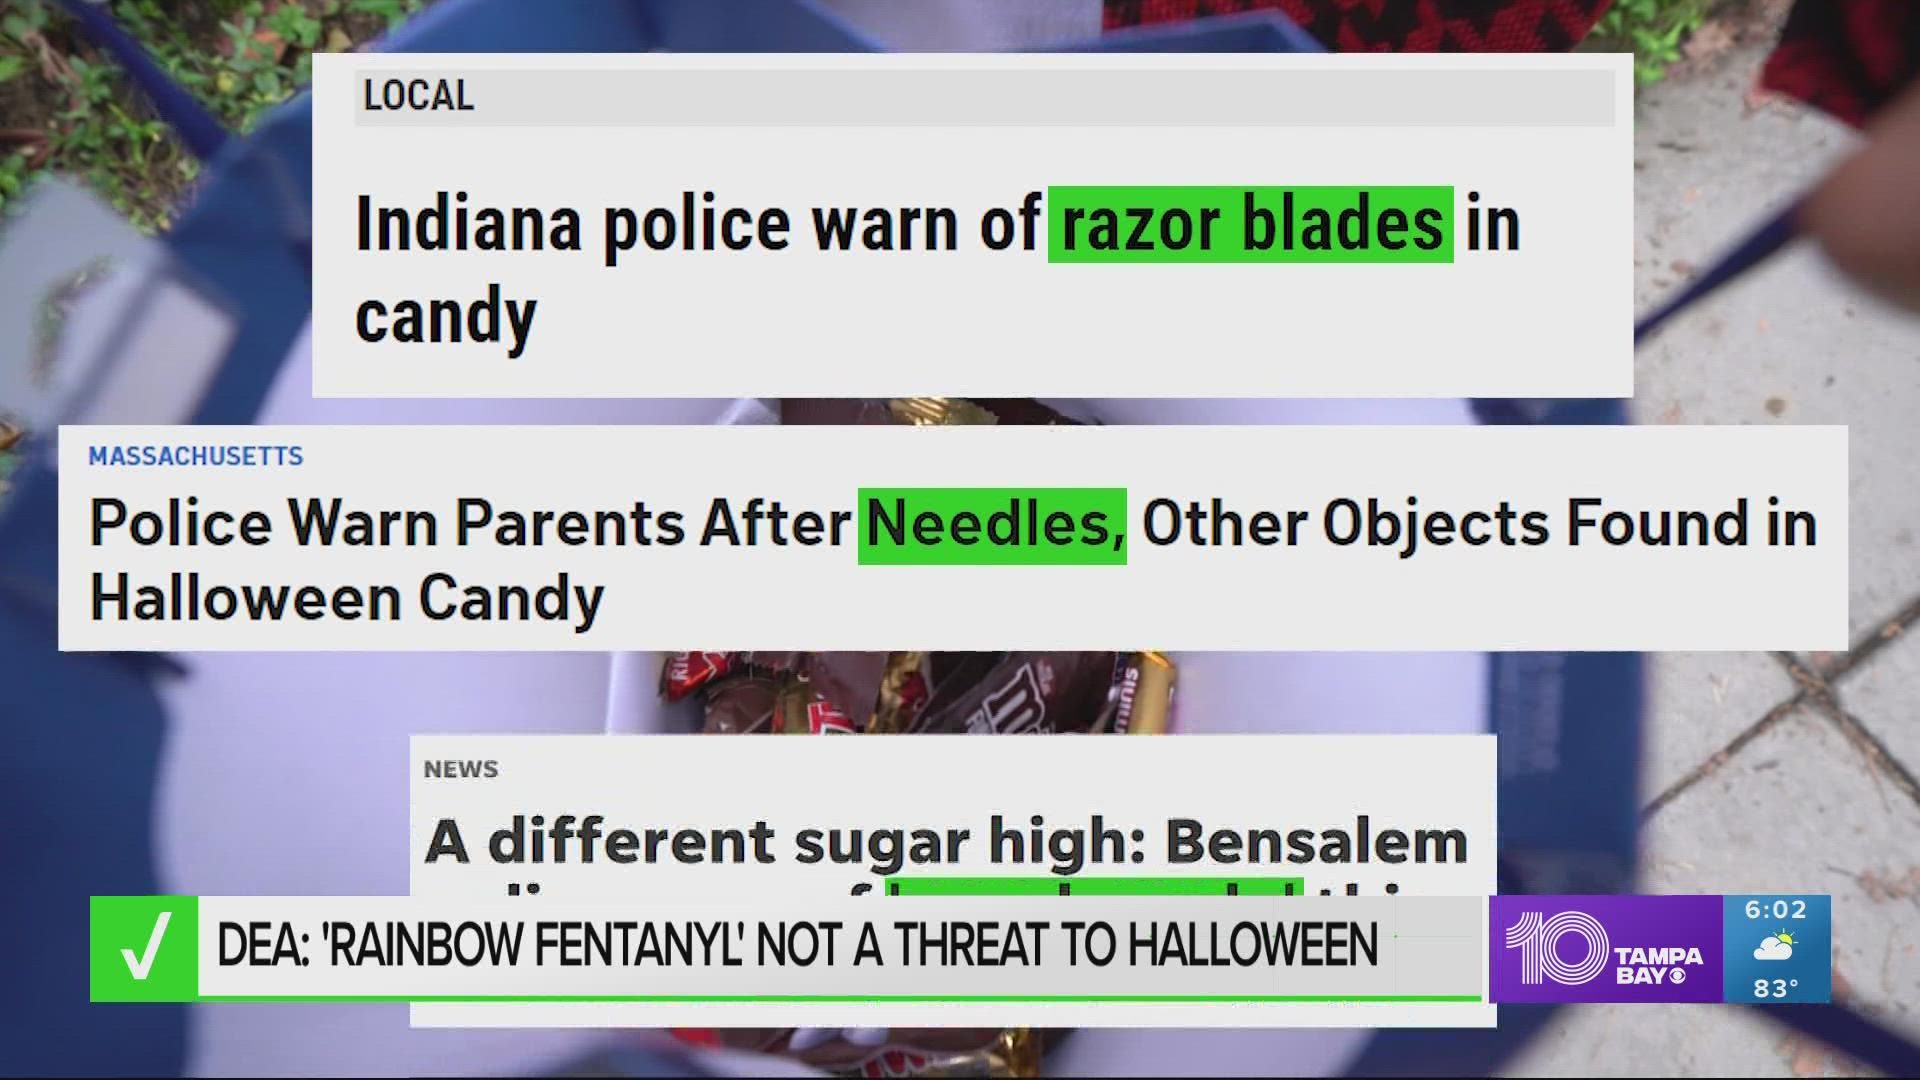 The Drug Enforcement Administration says it has not seen credible evidence that drug traffickers are putting “rainbow fentanyl” into Halloween candy.